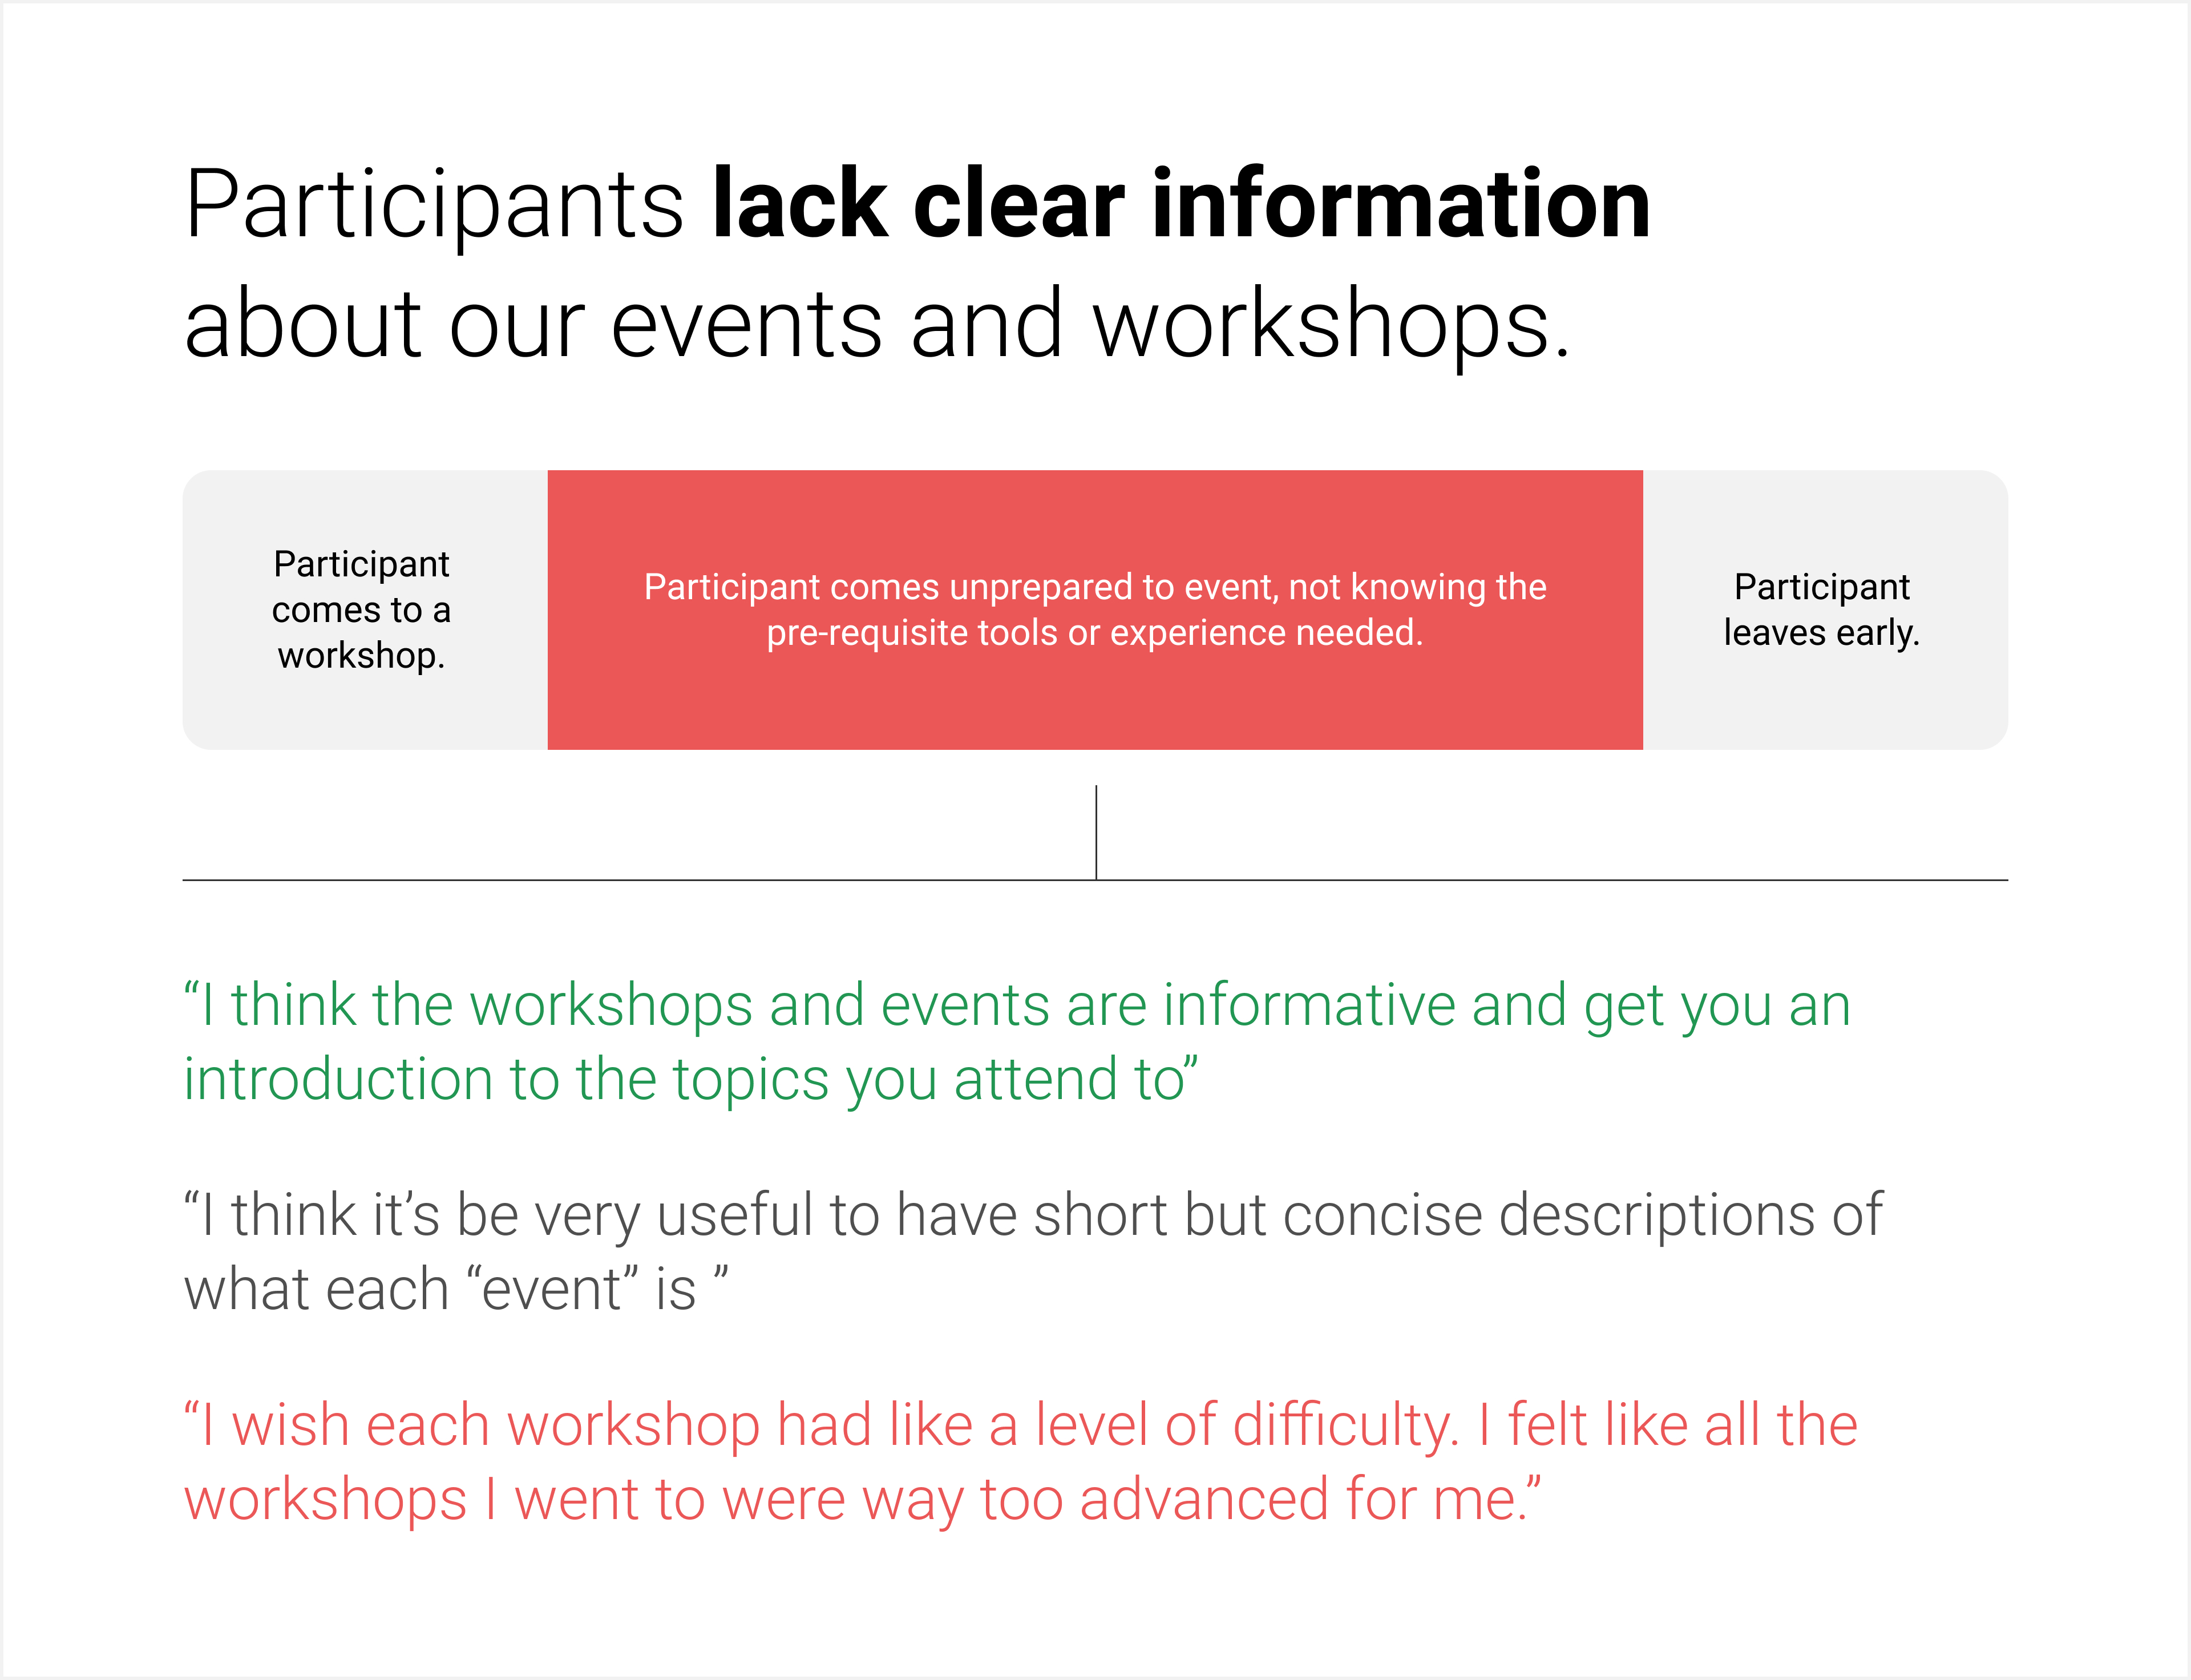 A summary of the problem that our hackathon participants faced - lacking clear information about our workshops and events.